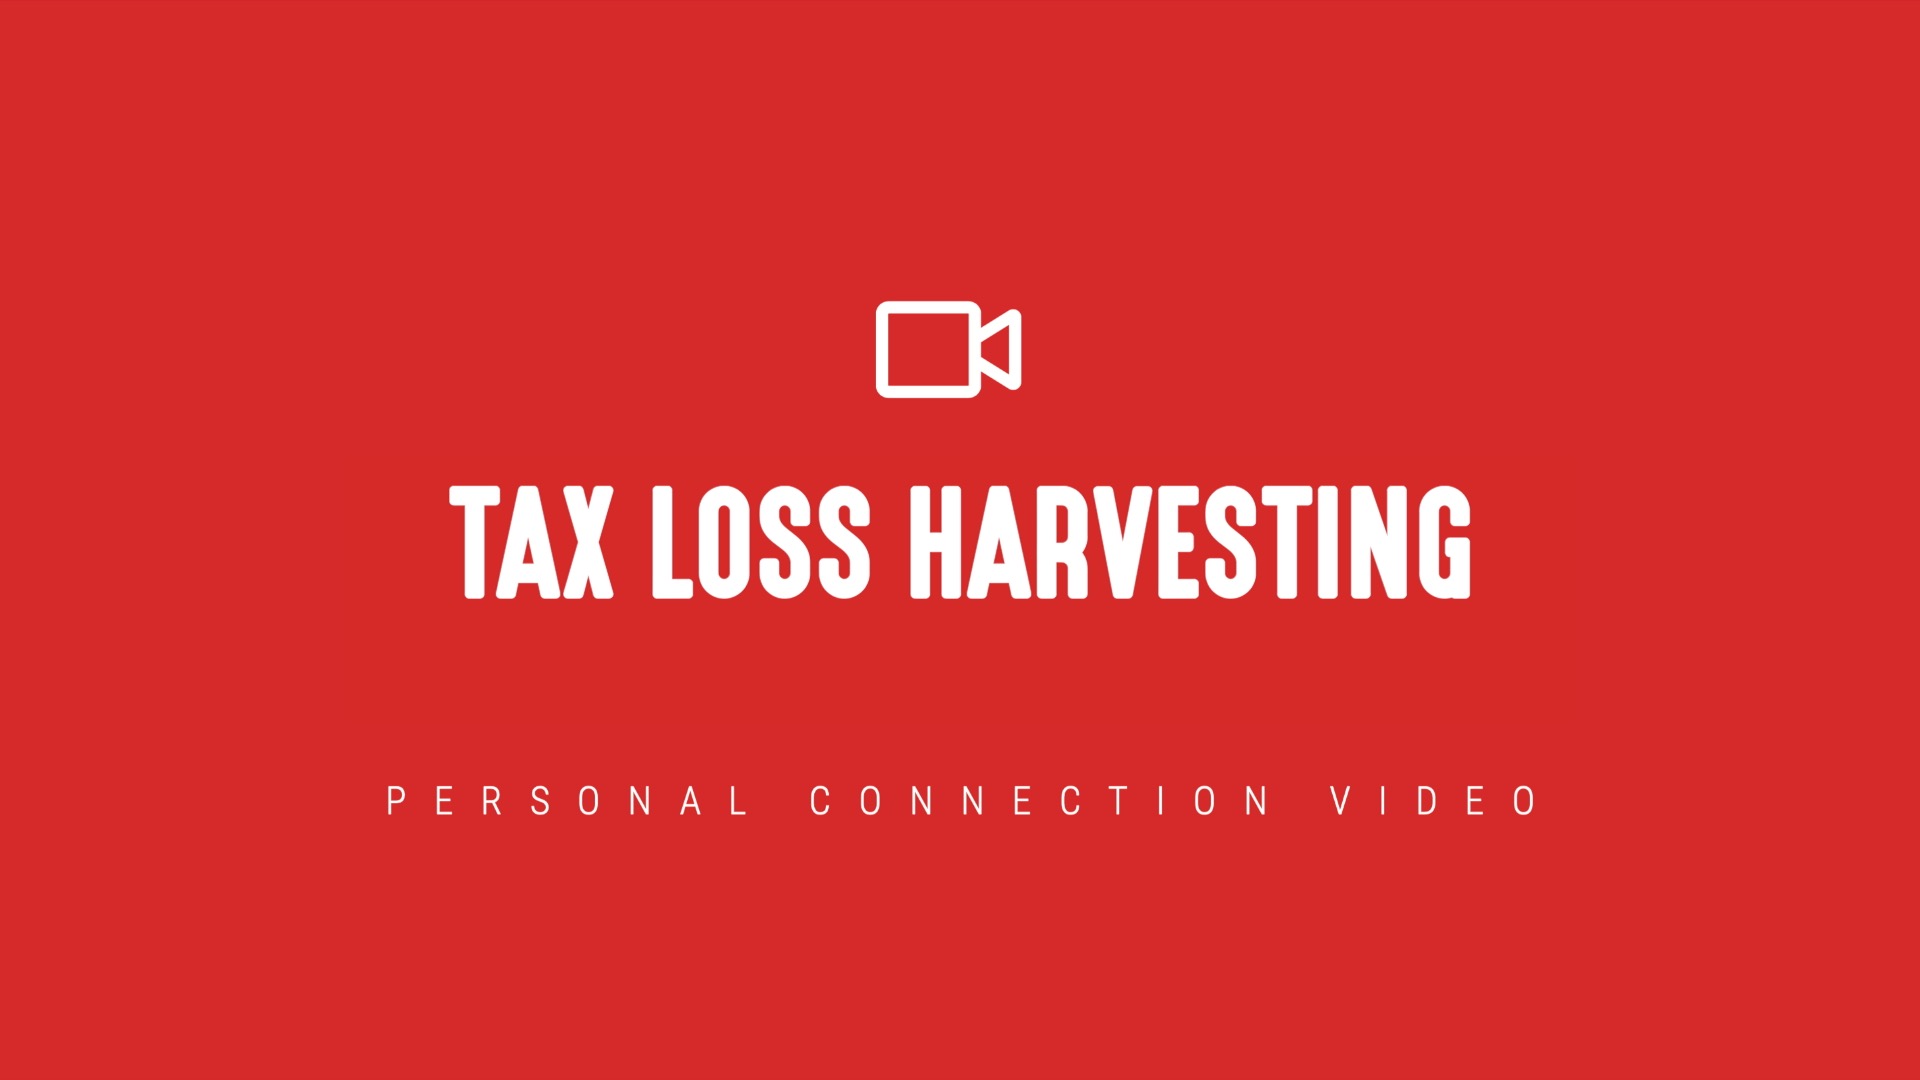 [NEW] Tax Loss Harvesting - Personal Connection Videos